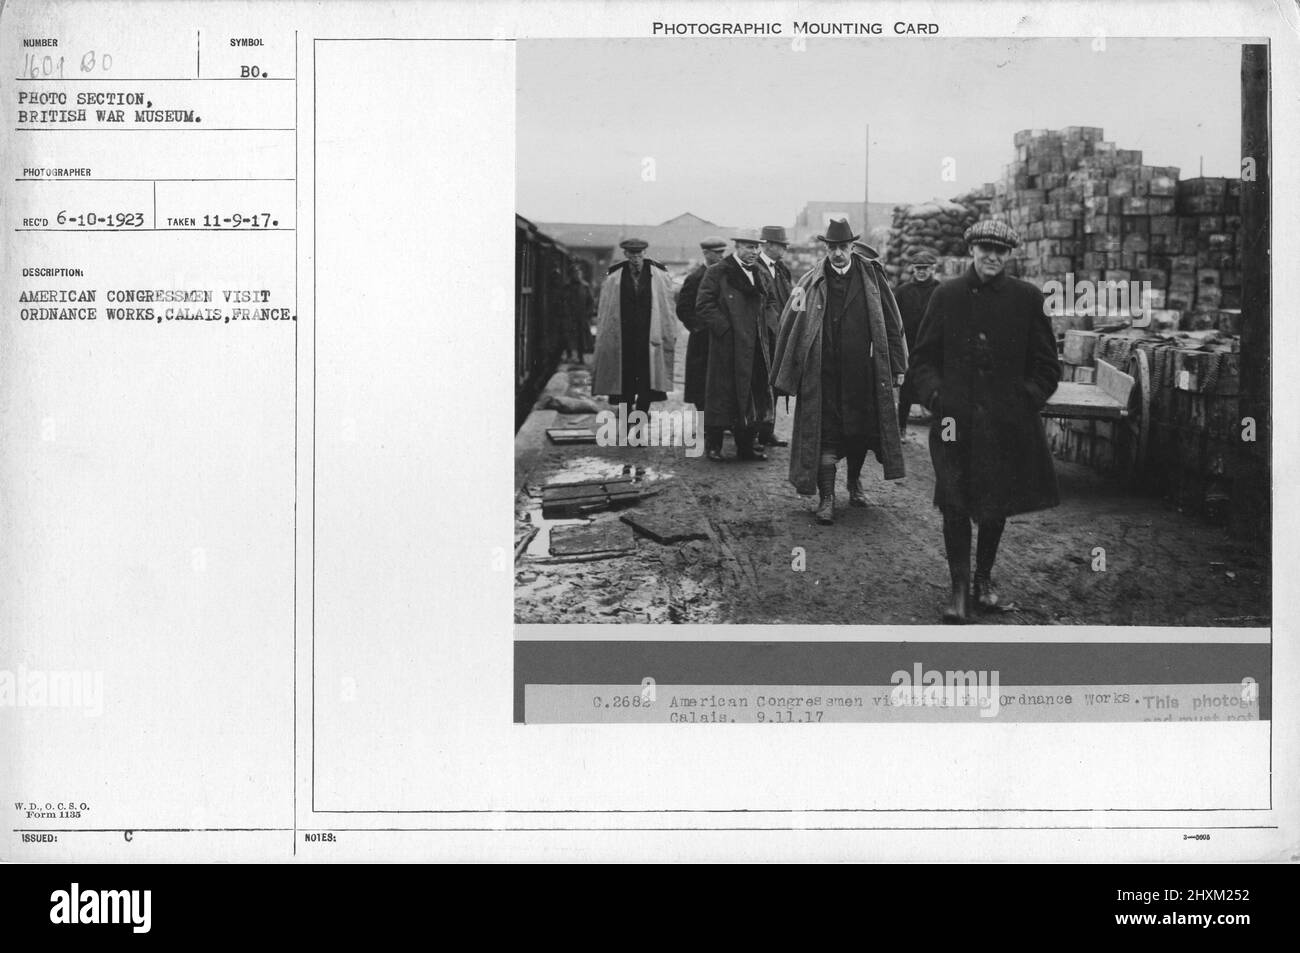 American congressmen visit Ordnance Works, Calais, France. 11-9-1917. Collection of World War I Photographs, 1914-1918 that depict the military activities of British and other nation's armed forces and personnel during World War I. Stock Photo